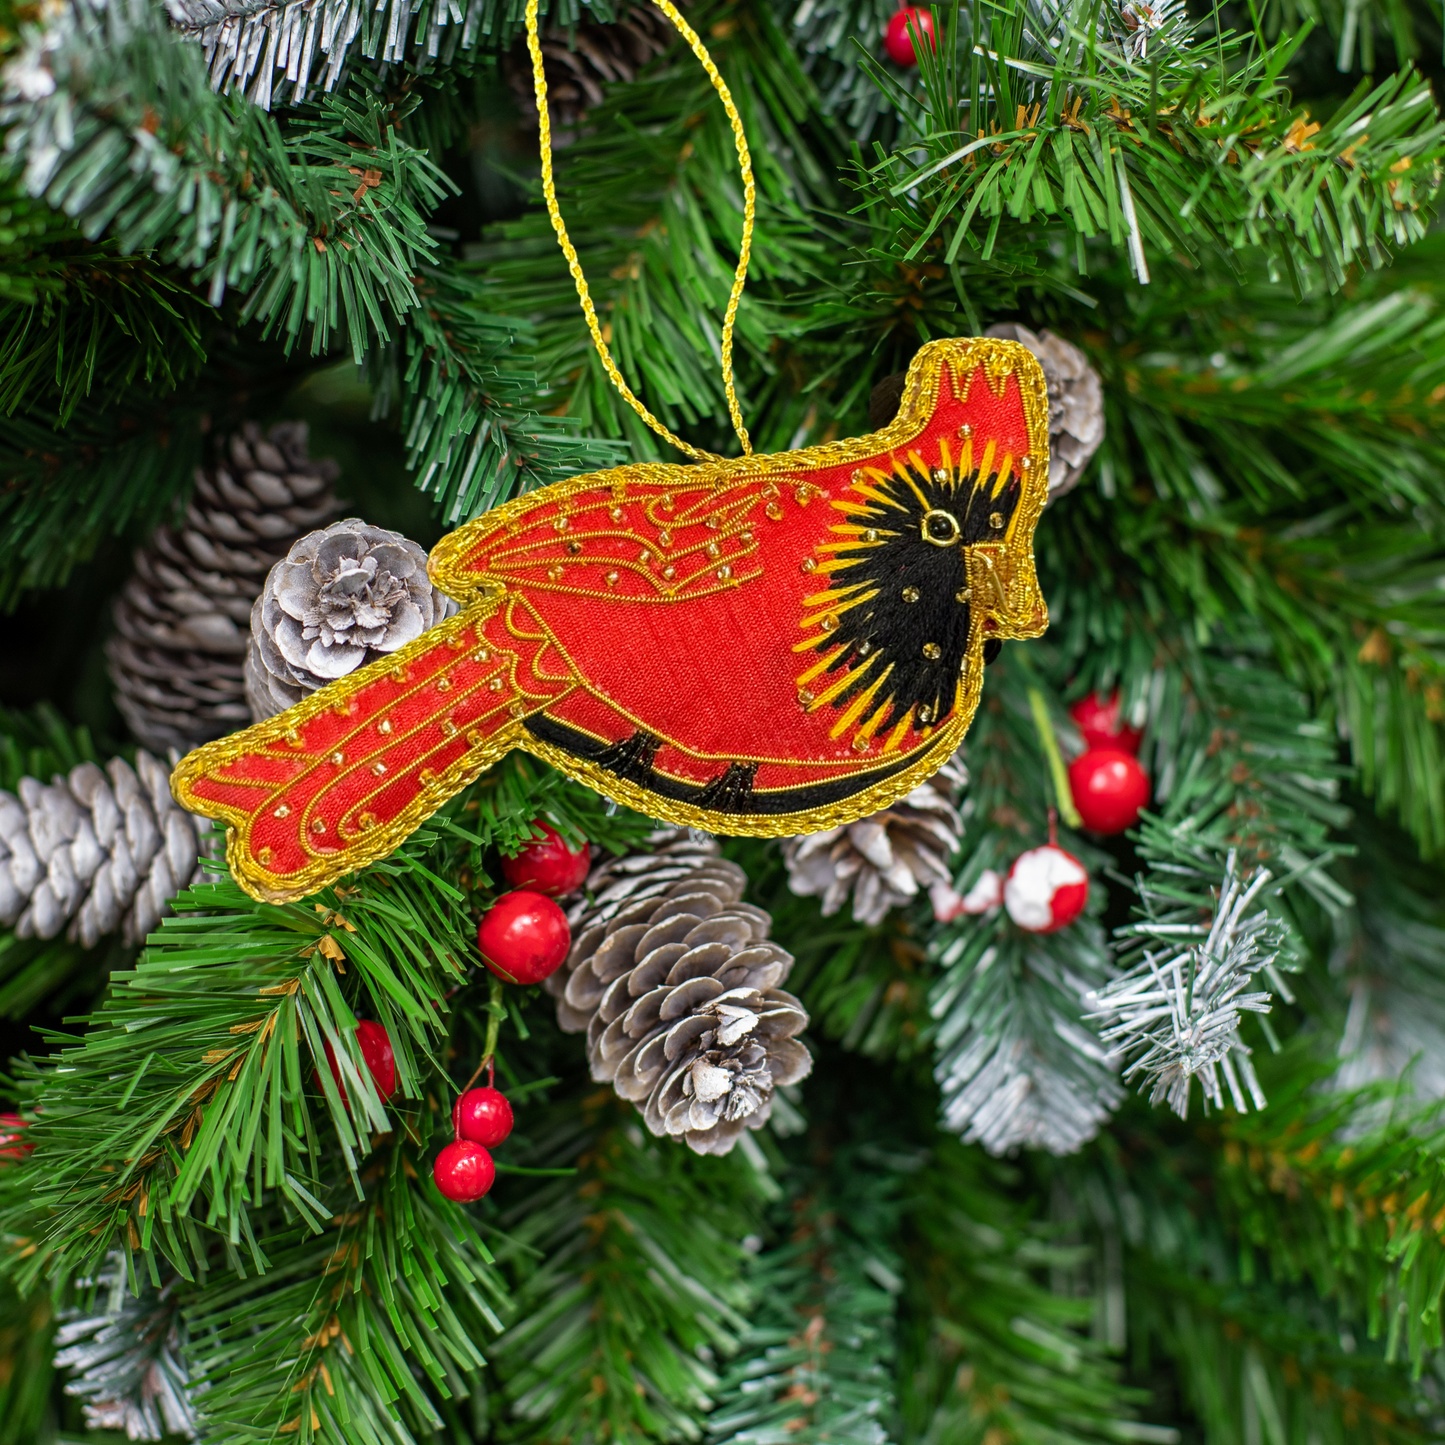 Red Cardinal with Zari Embroidery as Christmas tree ornament